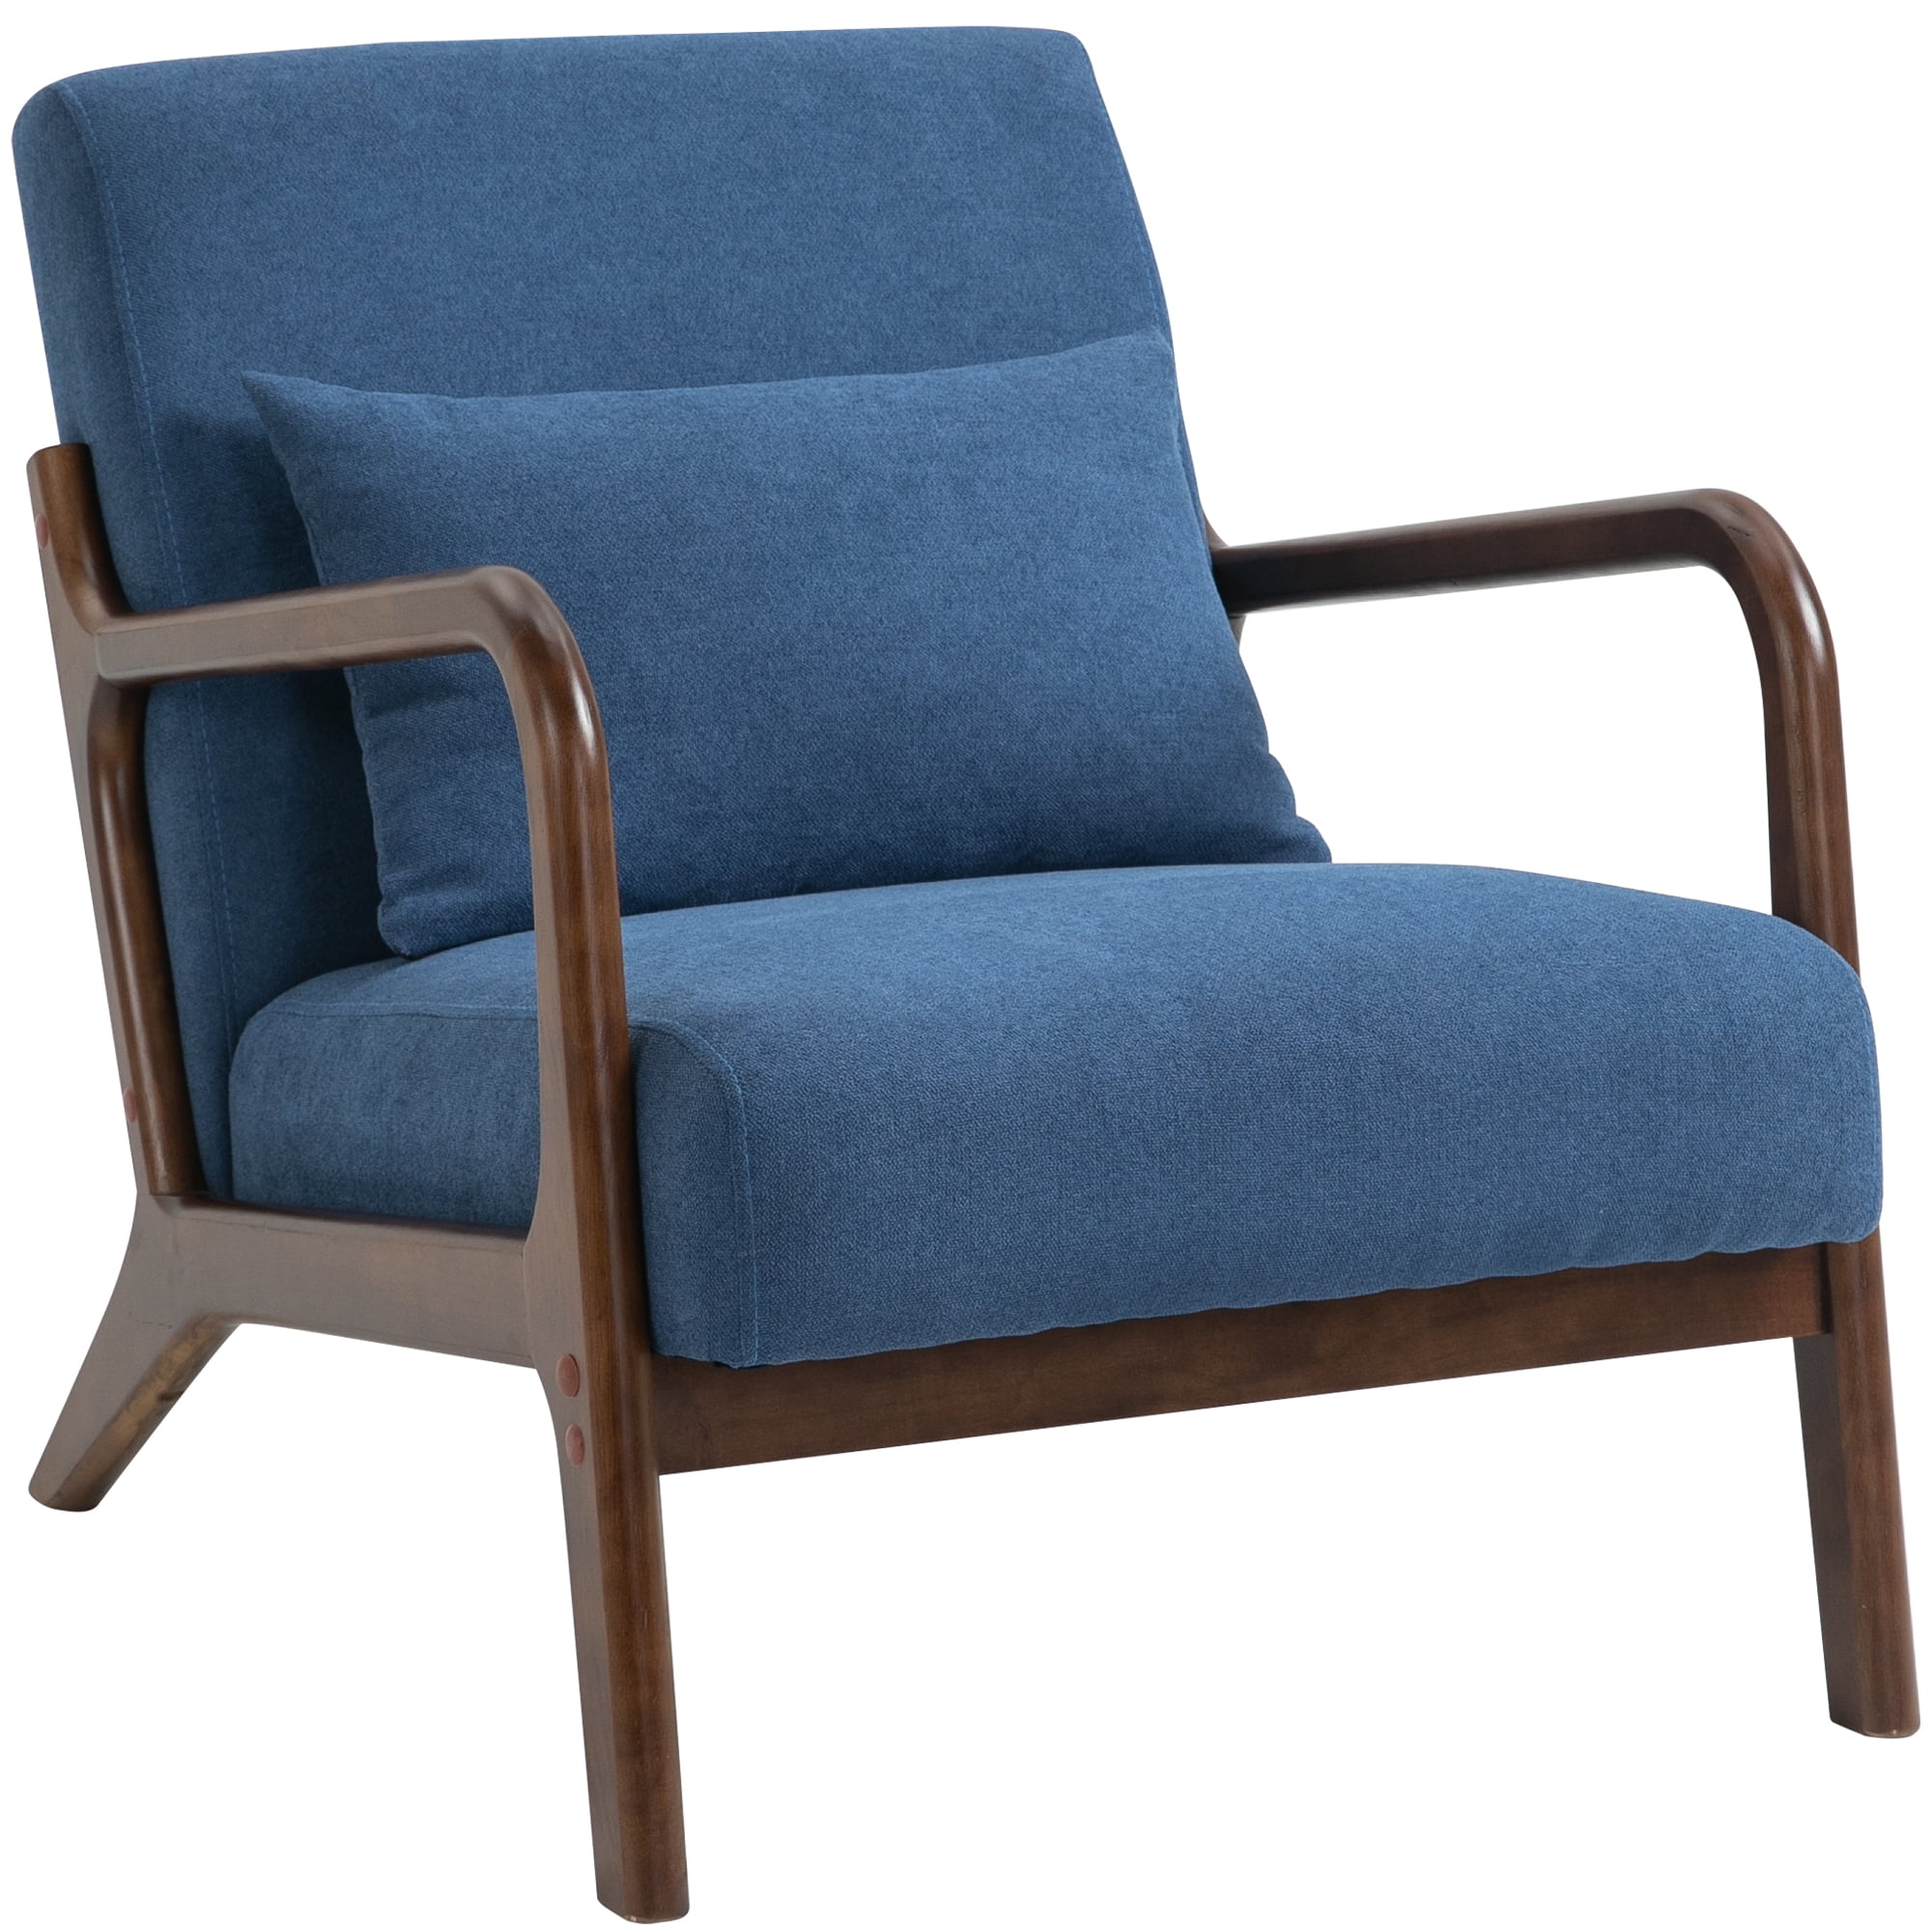 Yofe Comfy Mid-Century Modern Blue Velvet Upholstered Living Room Accent Chair, Wood Frame Arm Chair with Waist Cushion